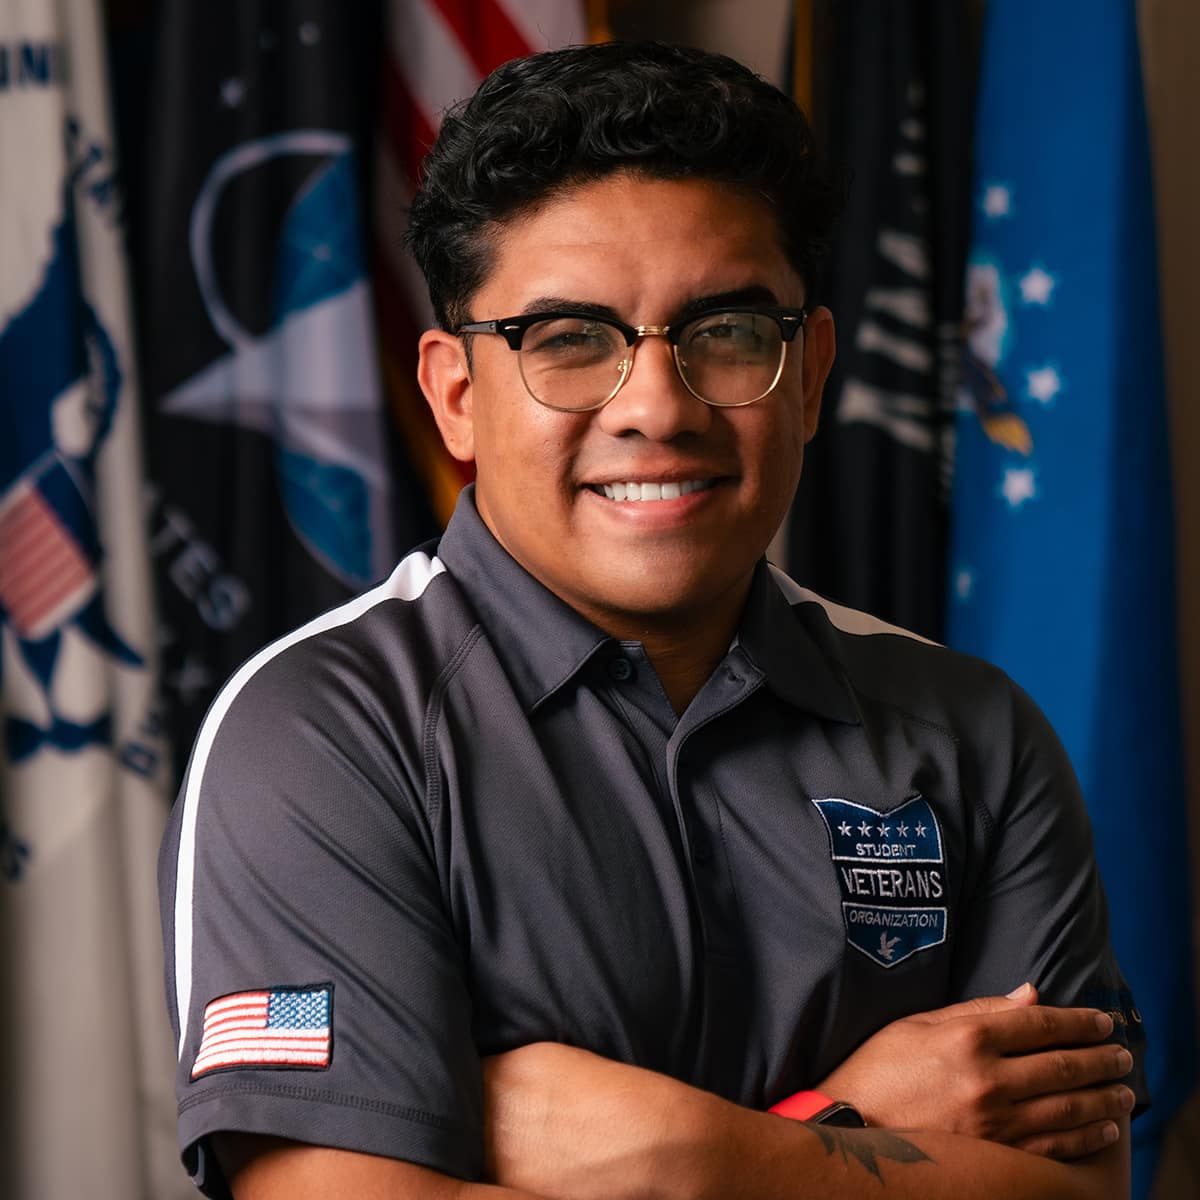 Vincent Becerra is a U.S. Air Force veteran and Industrial/Organizational Psychology student putting his studies to work for his fellow veterans on campus.